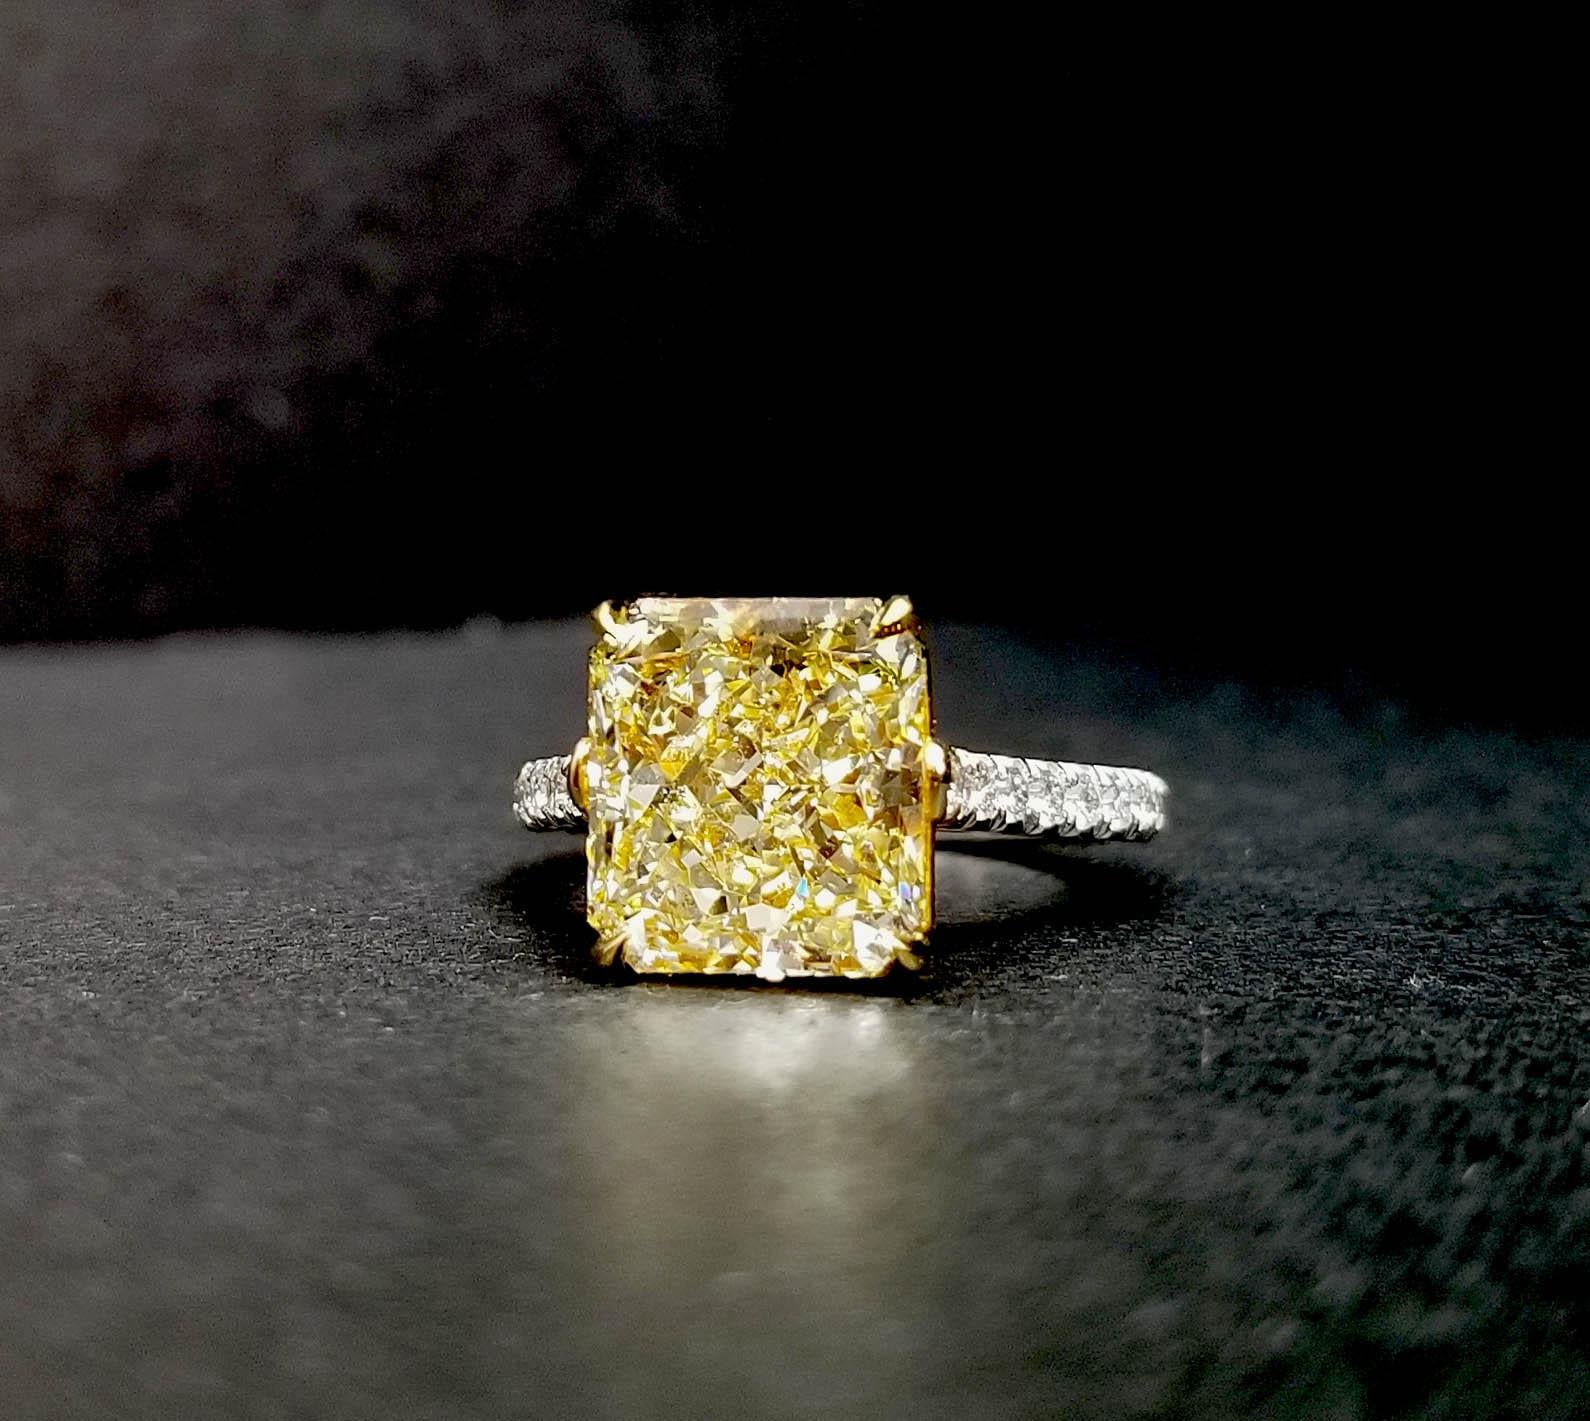 From SCARSELLI, this 5 carats fancy light yellow diamond VVS1  GIA certified (see attached certificate picture for detailed stone information) set in a mounting hand made with yellow 18k gold seat and prongs with a platinum shank. Along on the shank